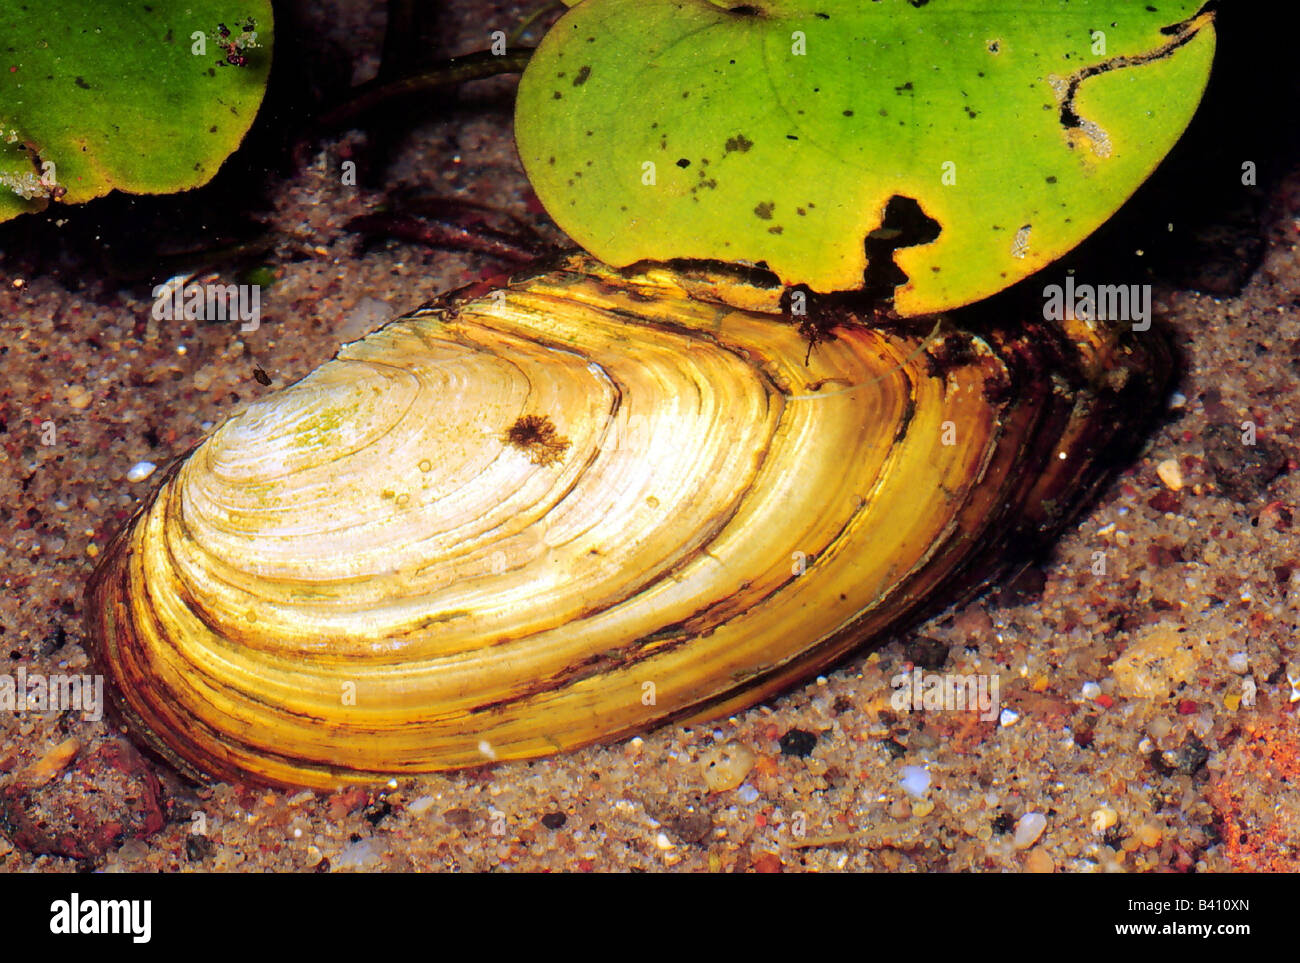 zoology / animals, cnidaria, Swan mussel, (Anodonta cygnea), underwater shot, distribution: North- and Central Europe, Balkans, Stock Photo